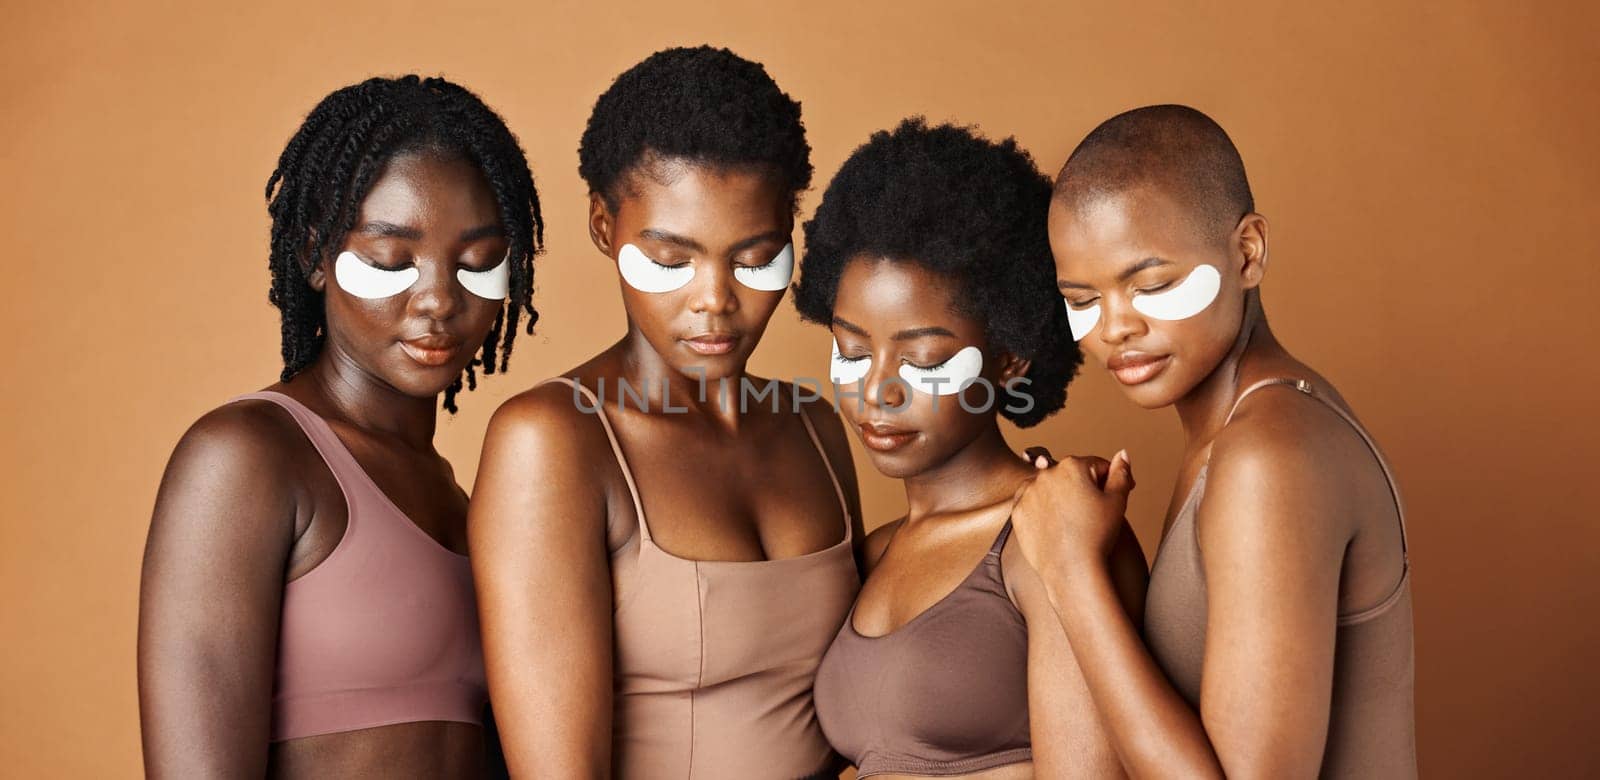 Happy black woman, eye patches and skincare for beauty, epilation or anti aging against a brown studio background. Group portrait of African female people or model in dermatology, health and wellness.